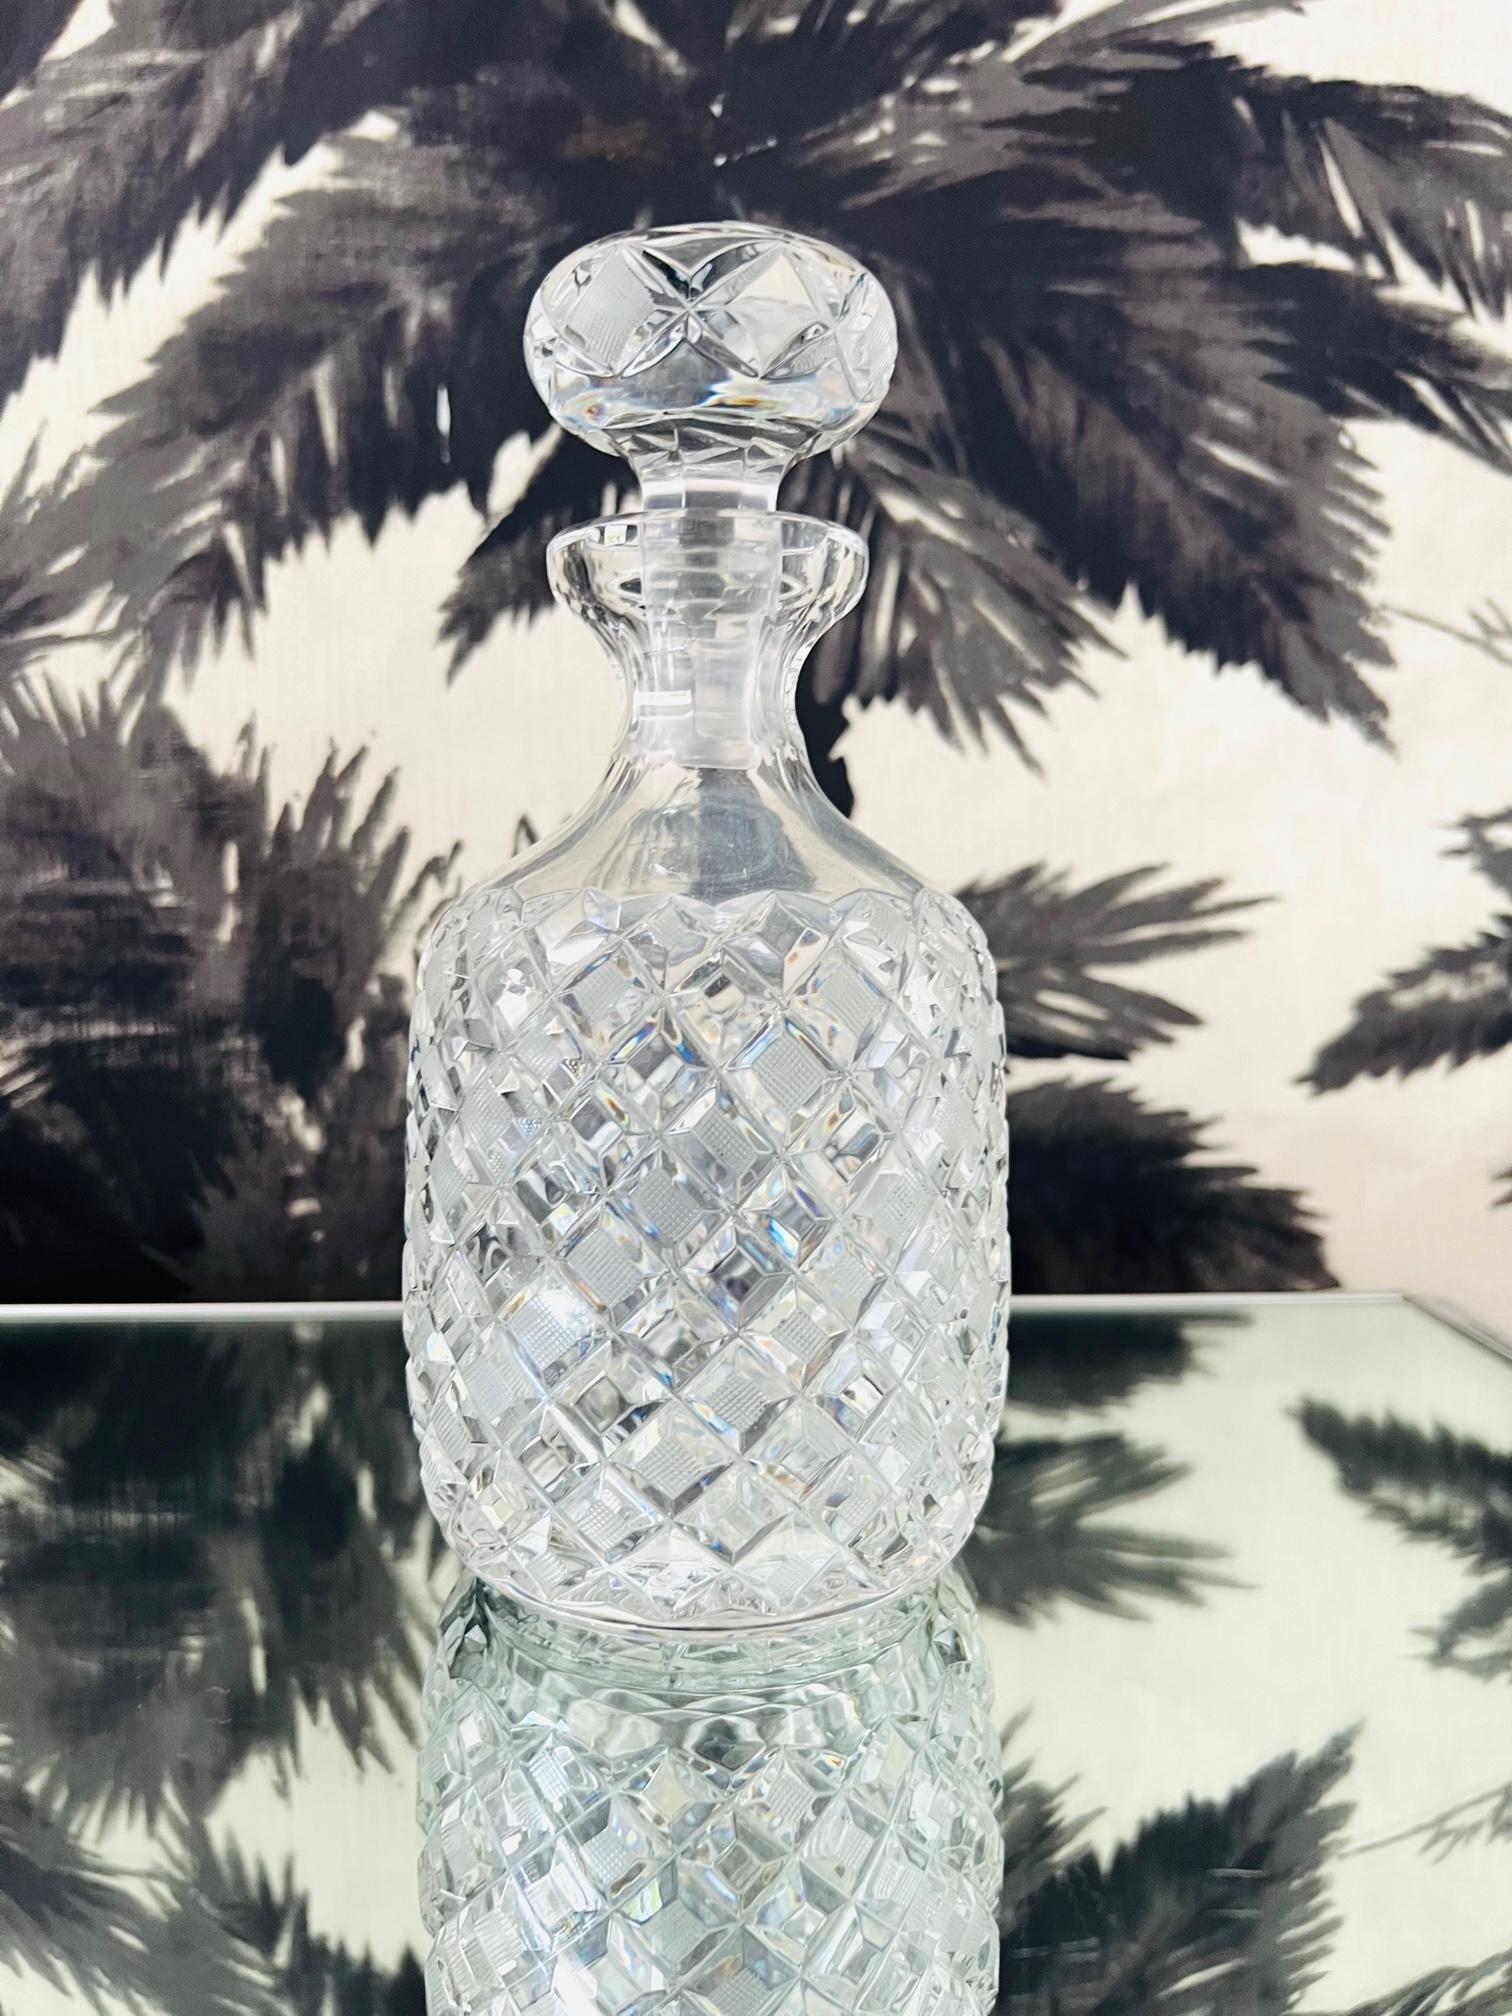 Edwardian Vintage English Crystal Decanter with Cross Hatched Diamond Pattern, circa 1980 For Sale